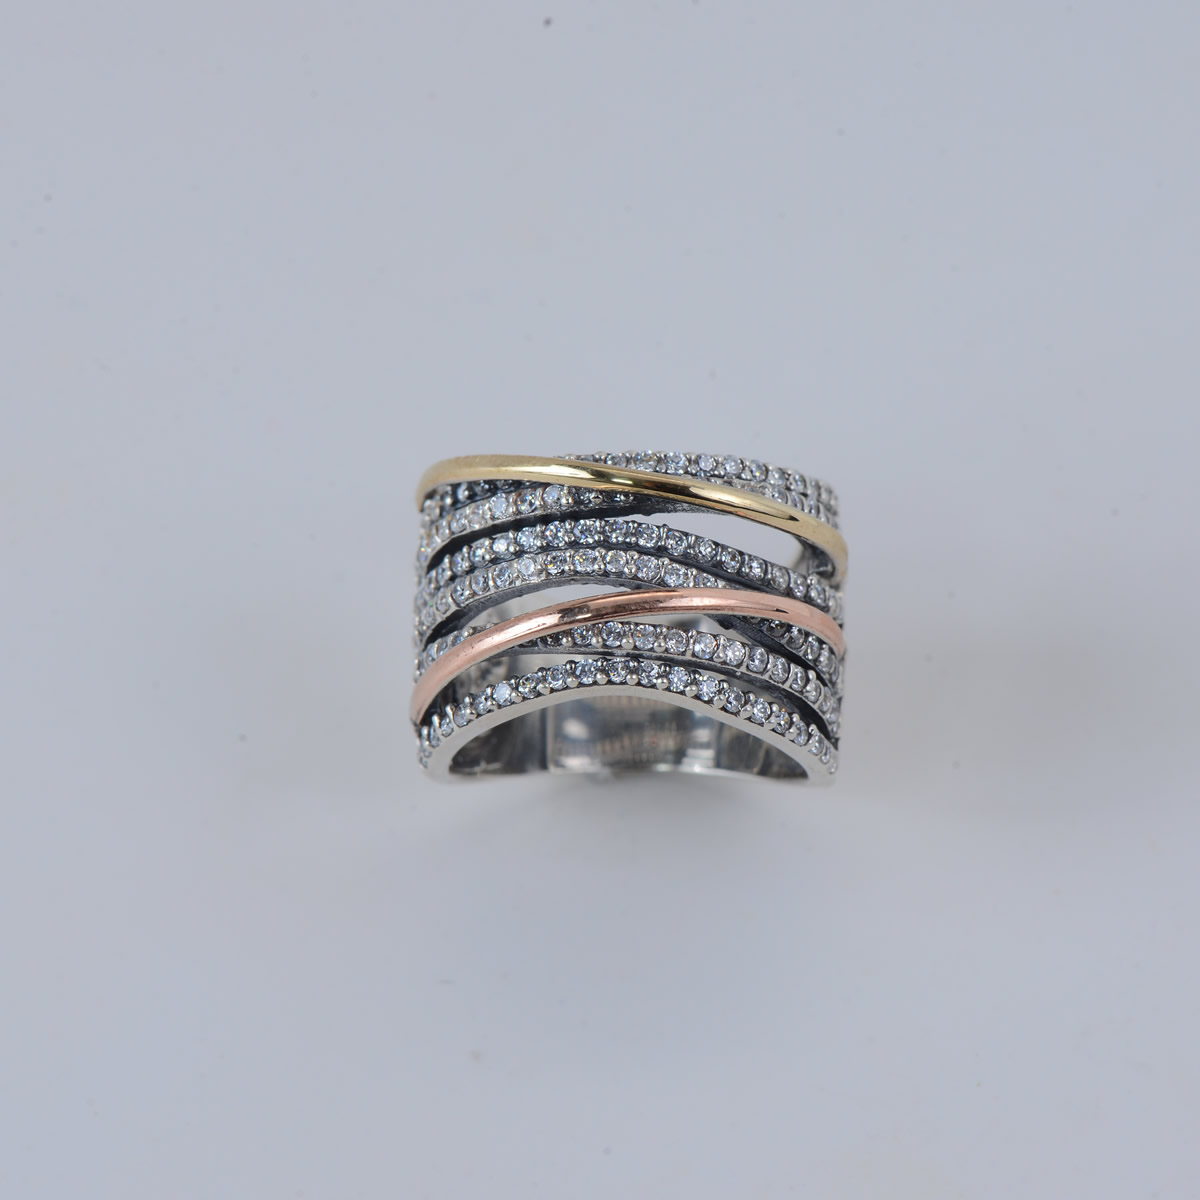 Elegant Sterling Silver 9.25 Ring with Gold-and Rosėplating